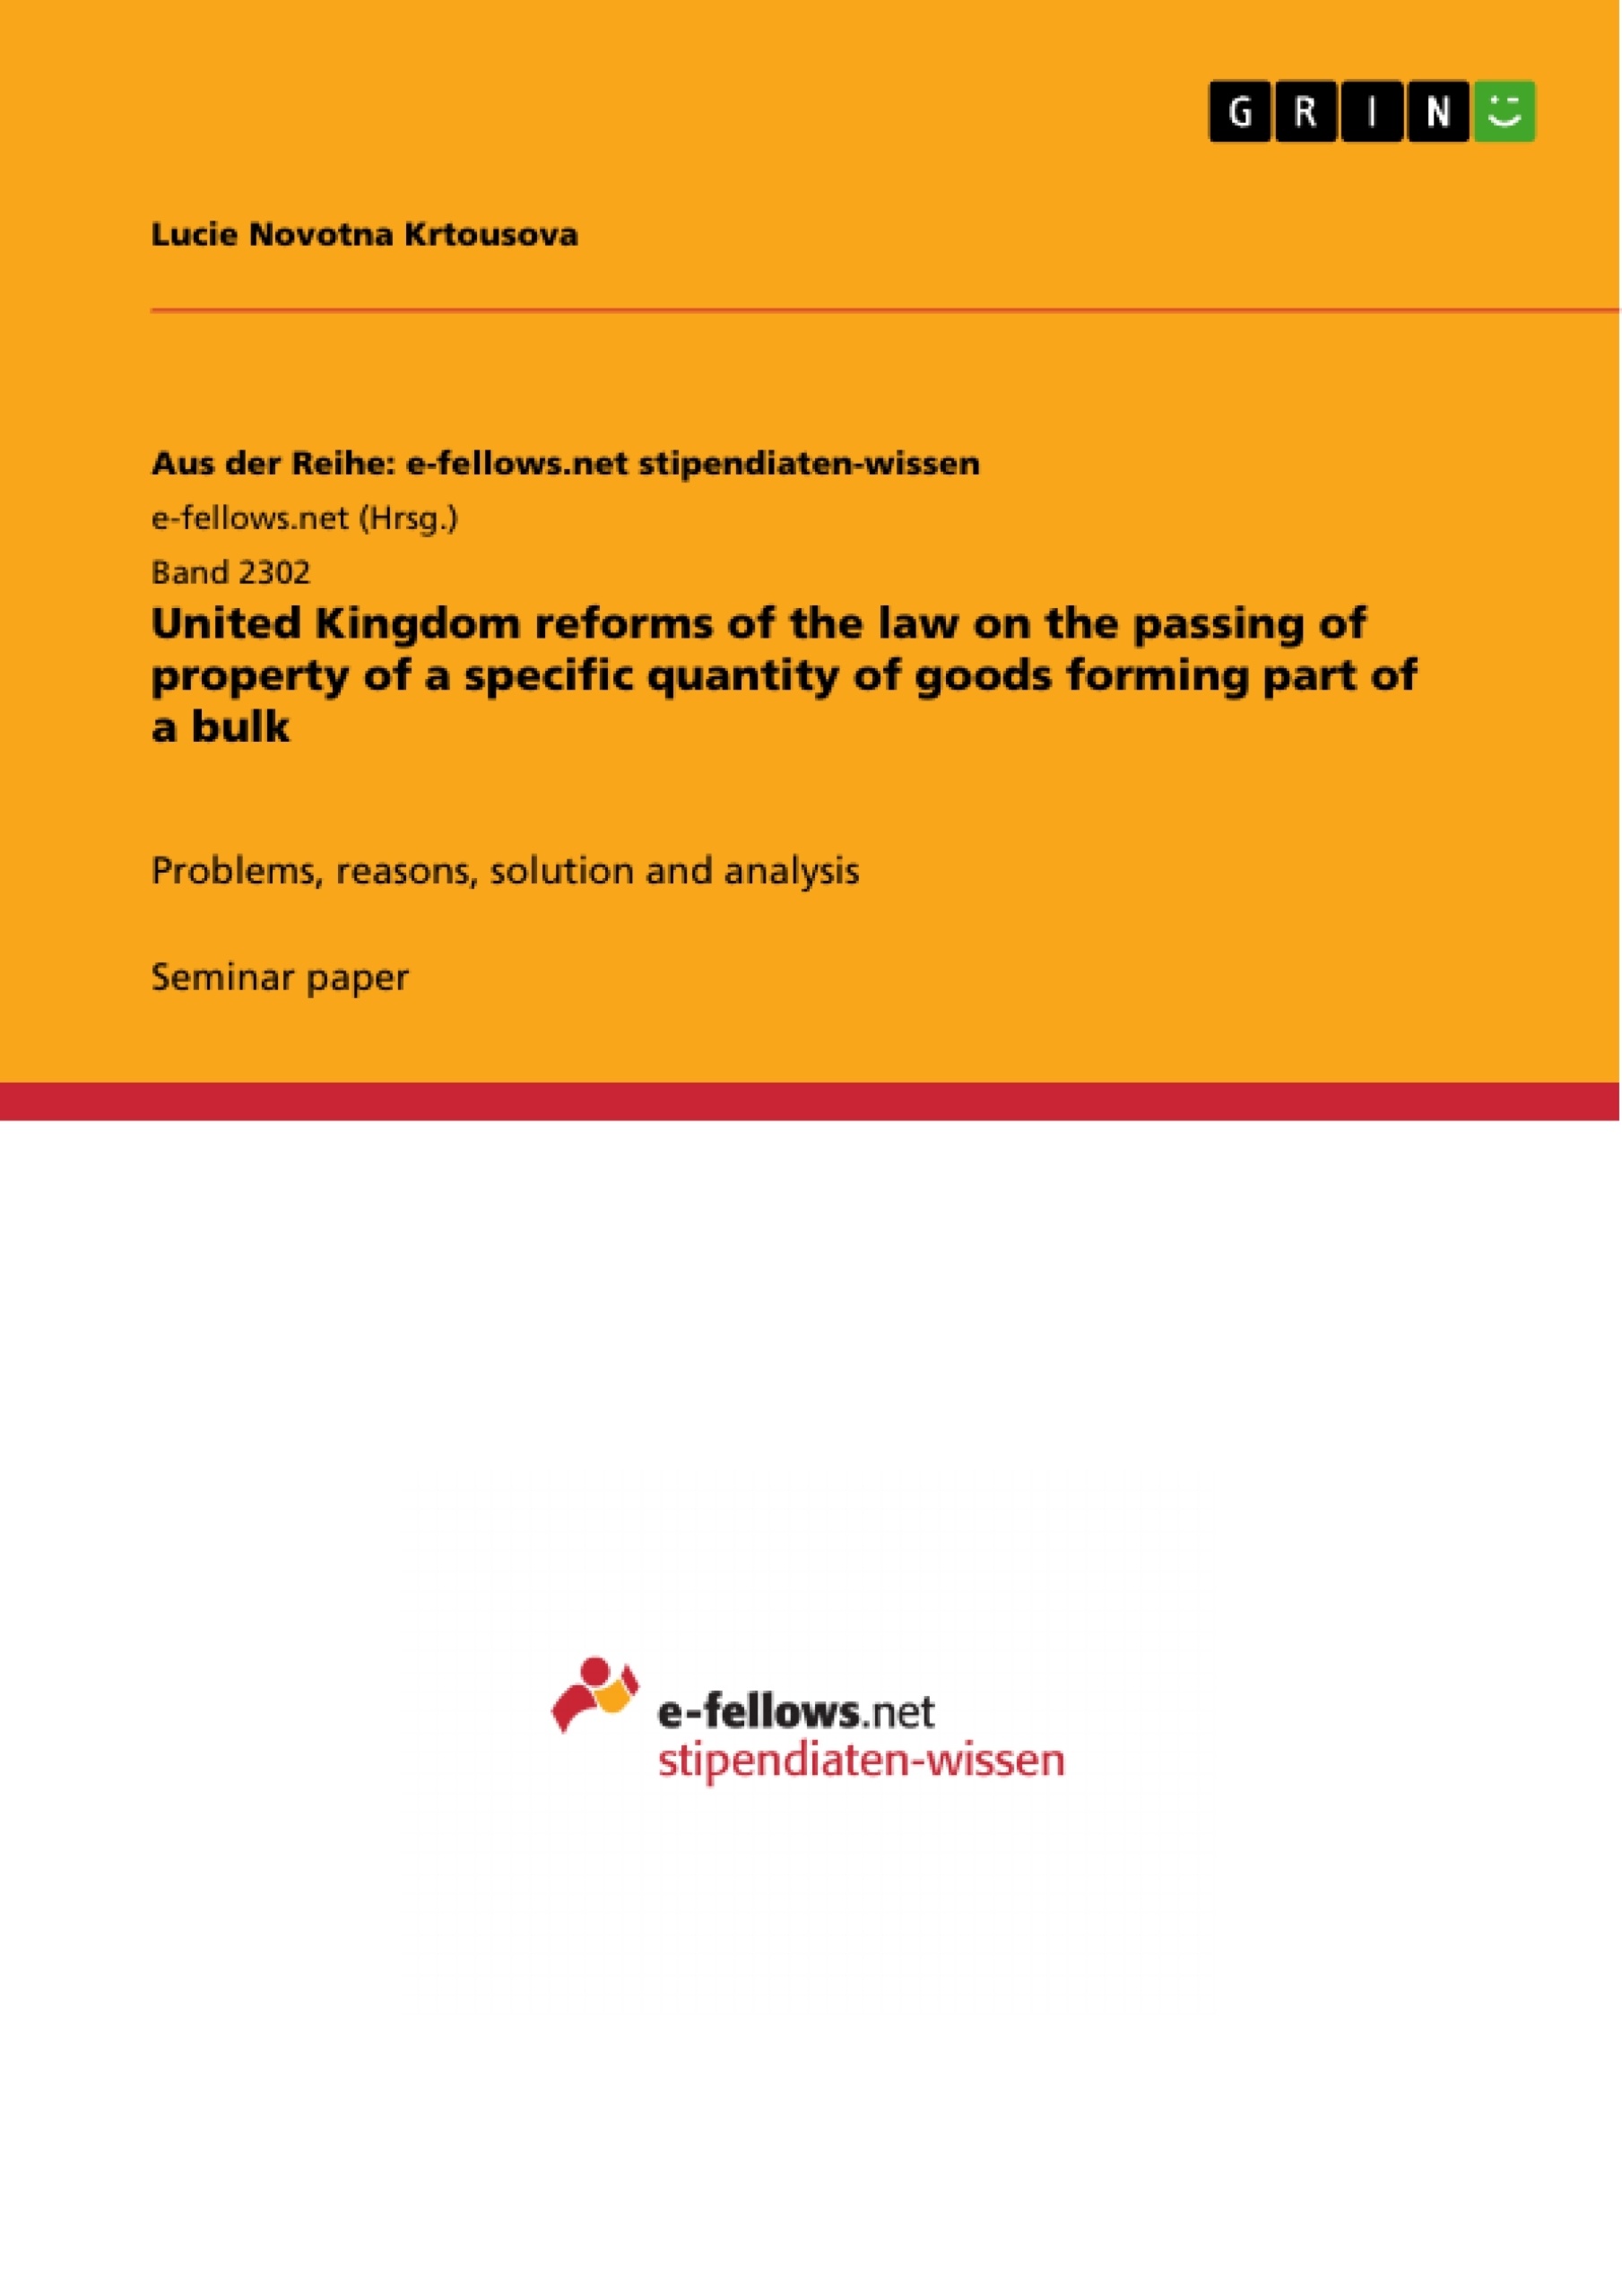 Title: United Kingdom reforms of the law on the passing of property of a specific quantity of goods forming part of a bulk